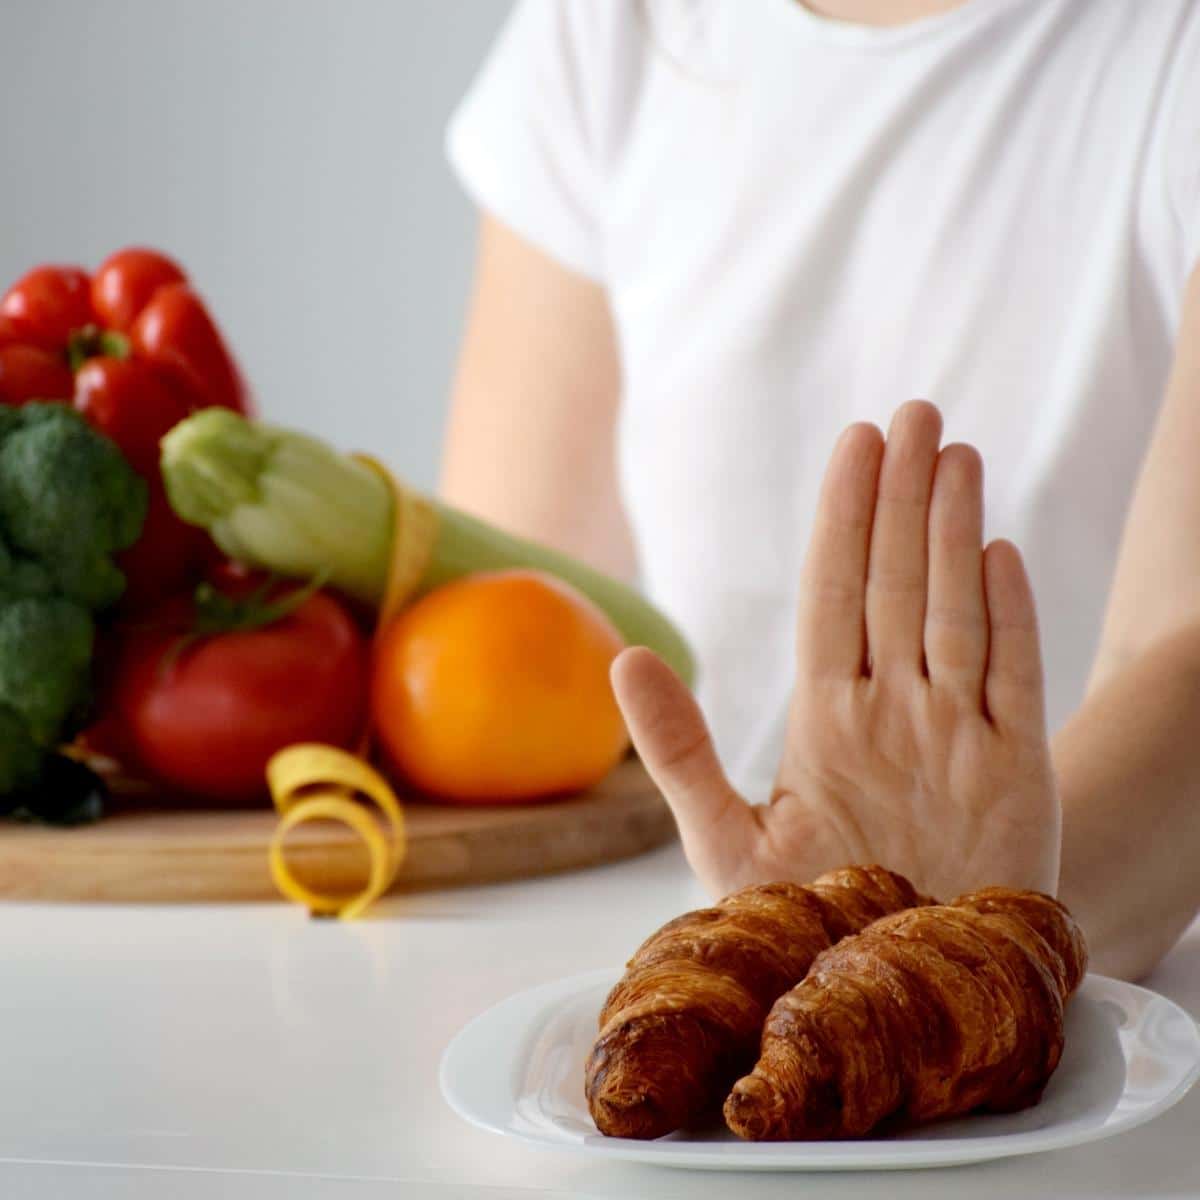 Hand of woman refusing from dessert in favor of vegetables